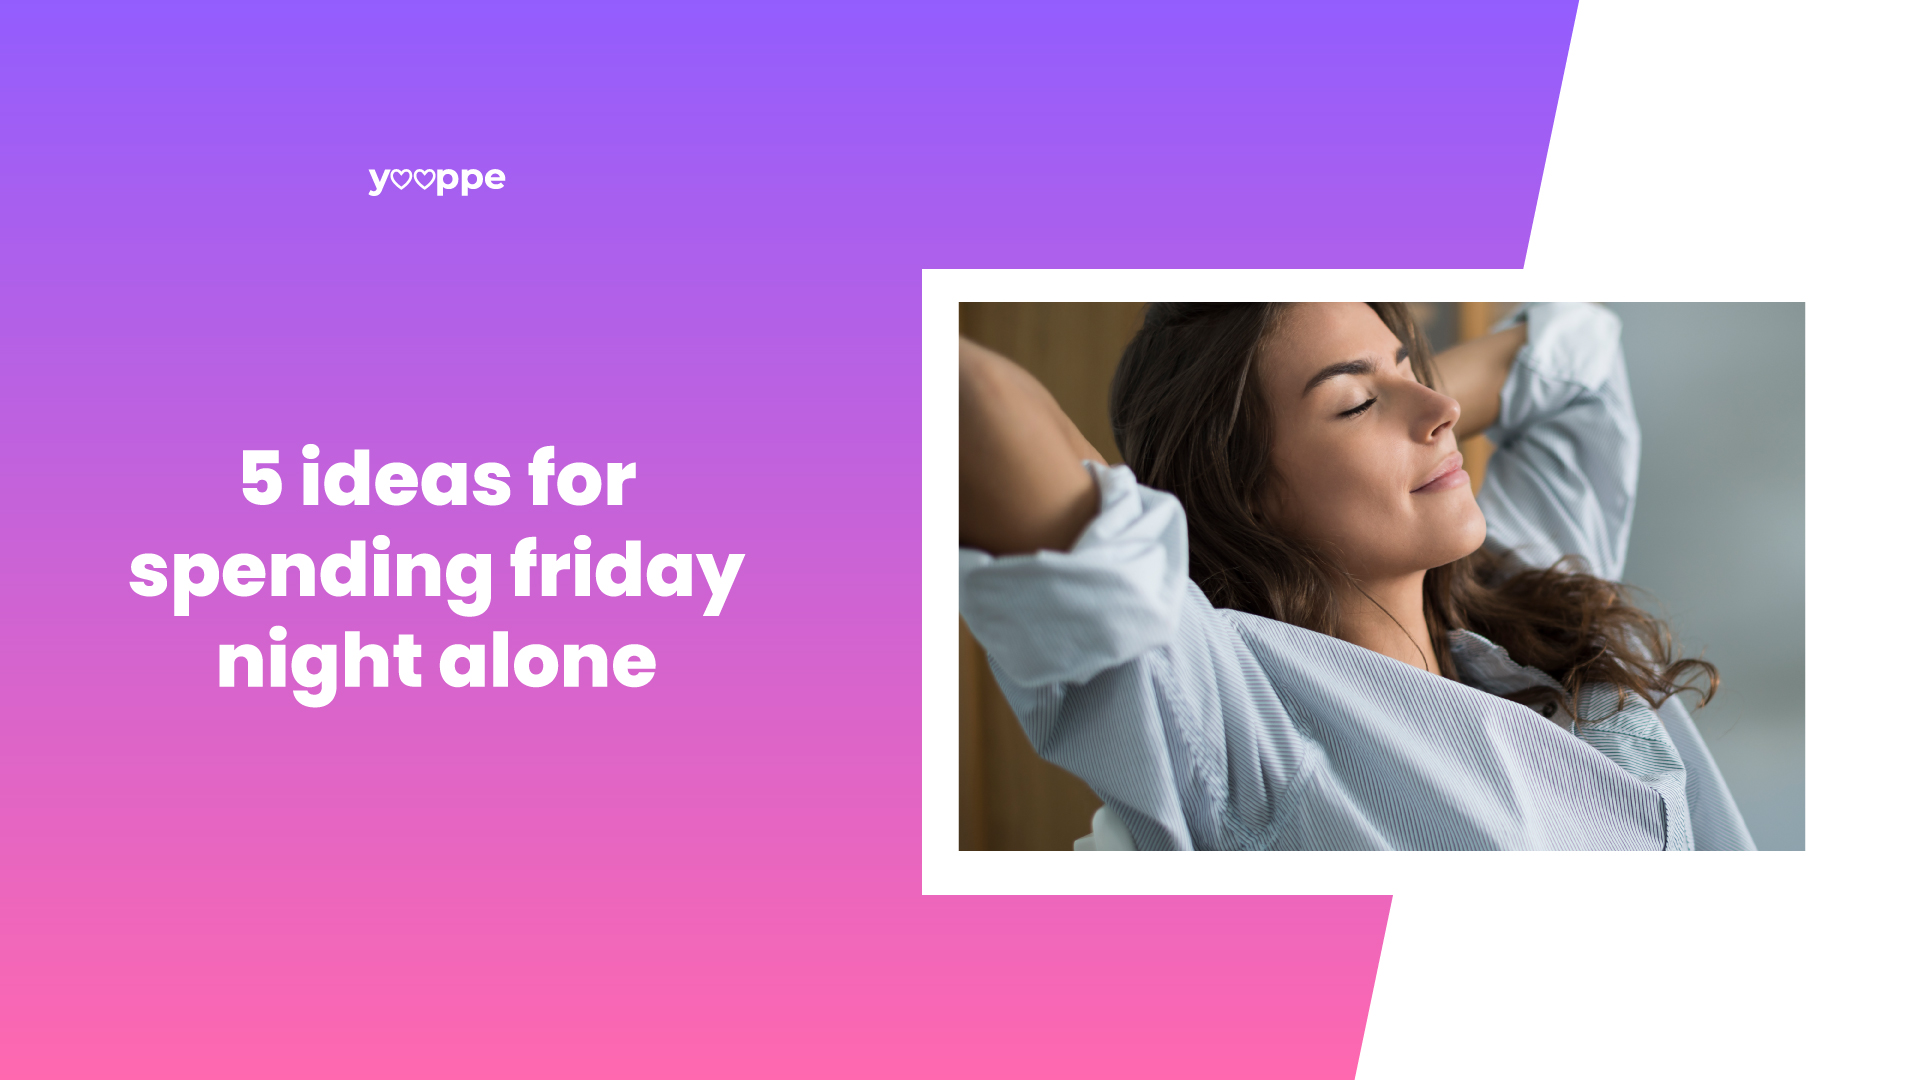 woman-spending-friday-night-alone-at-home